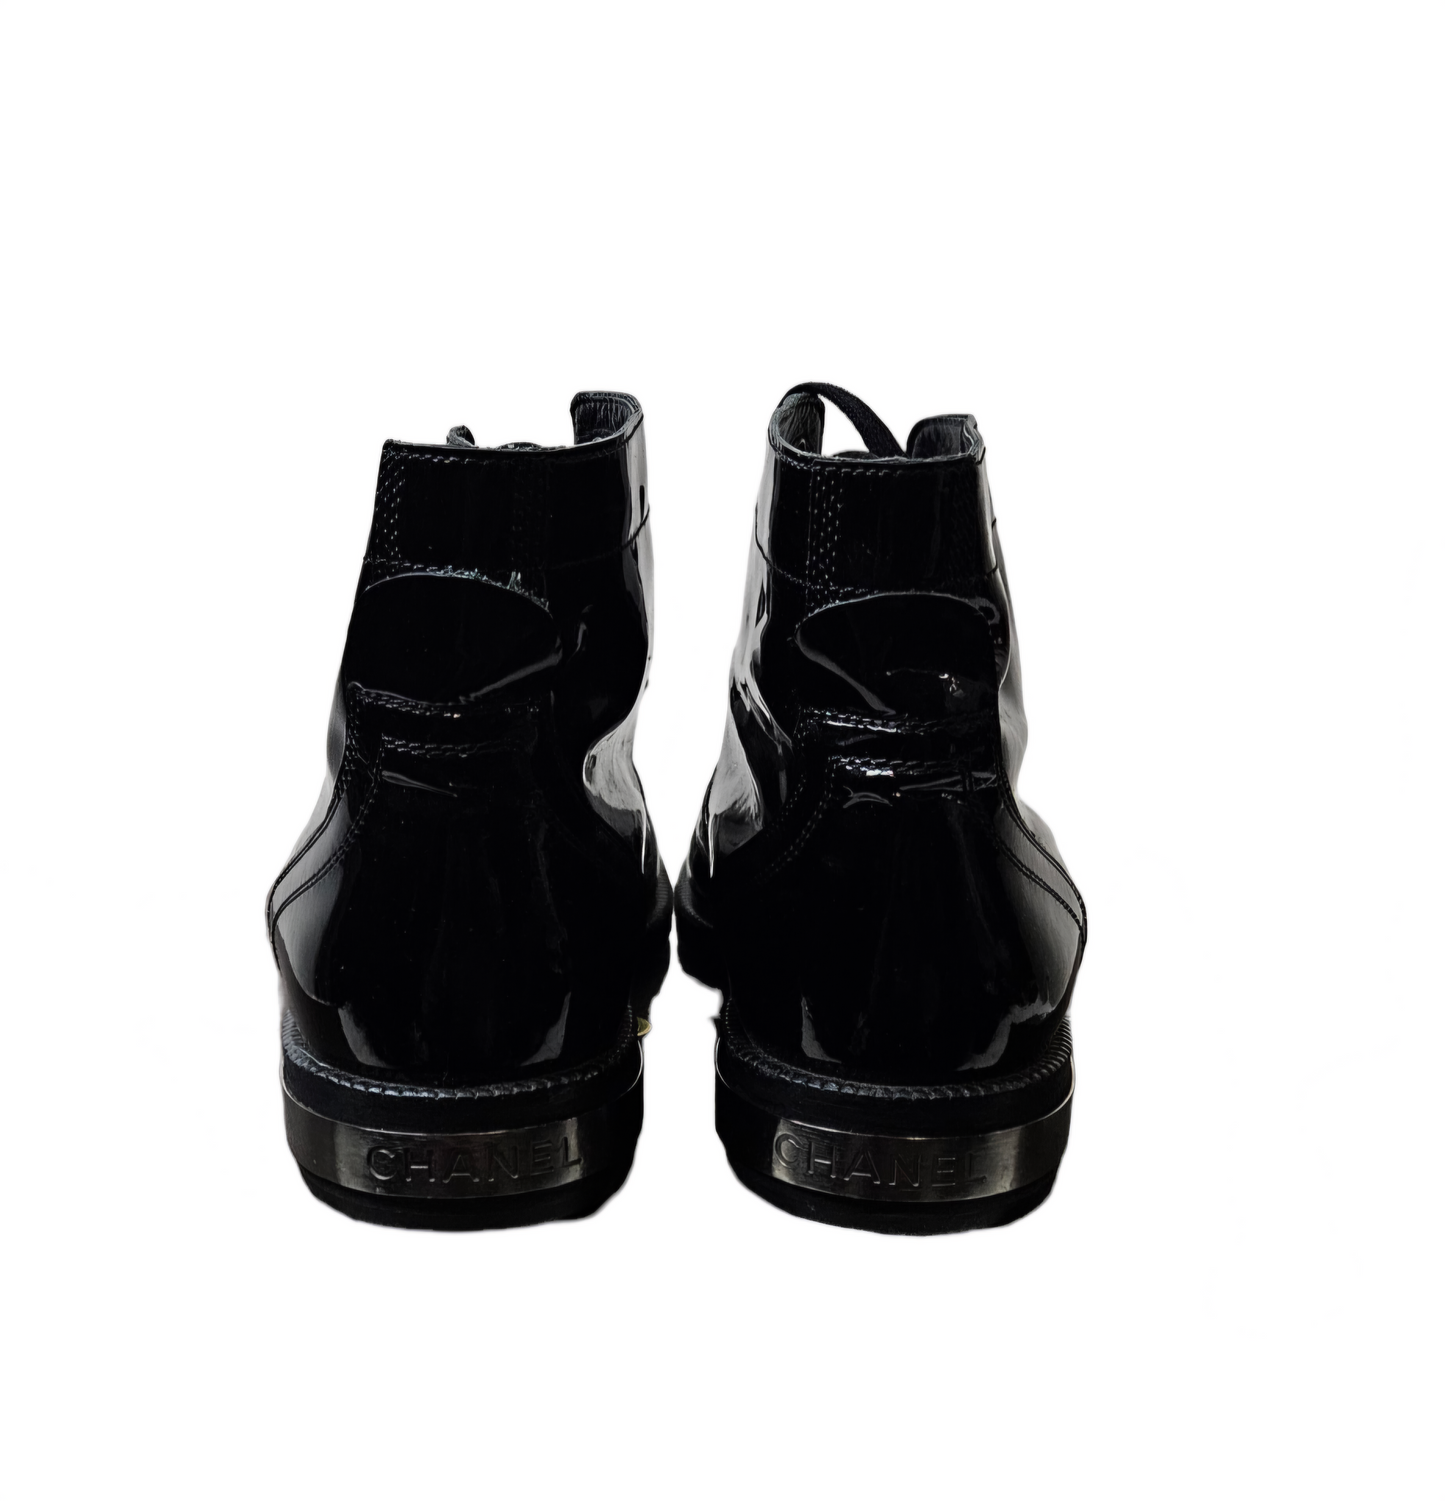 Chanel Black Patent Leather Ankle Boots with Metal Detail